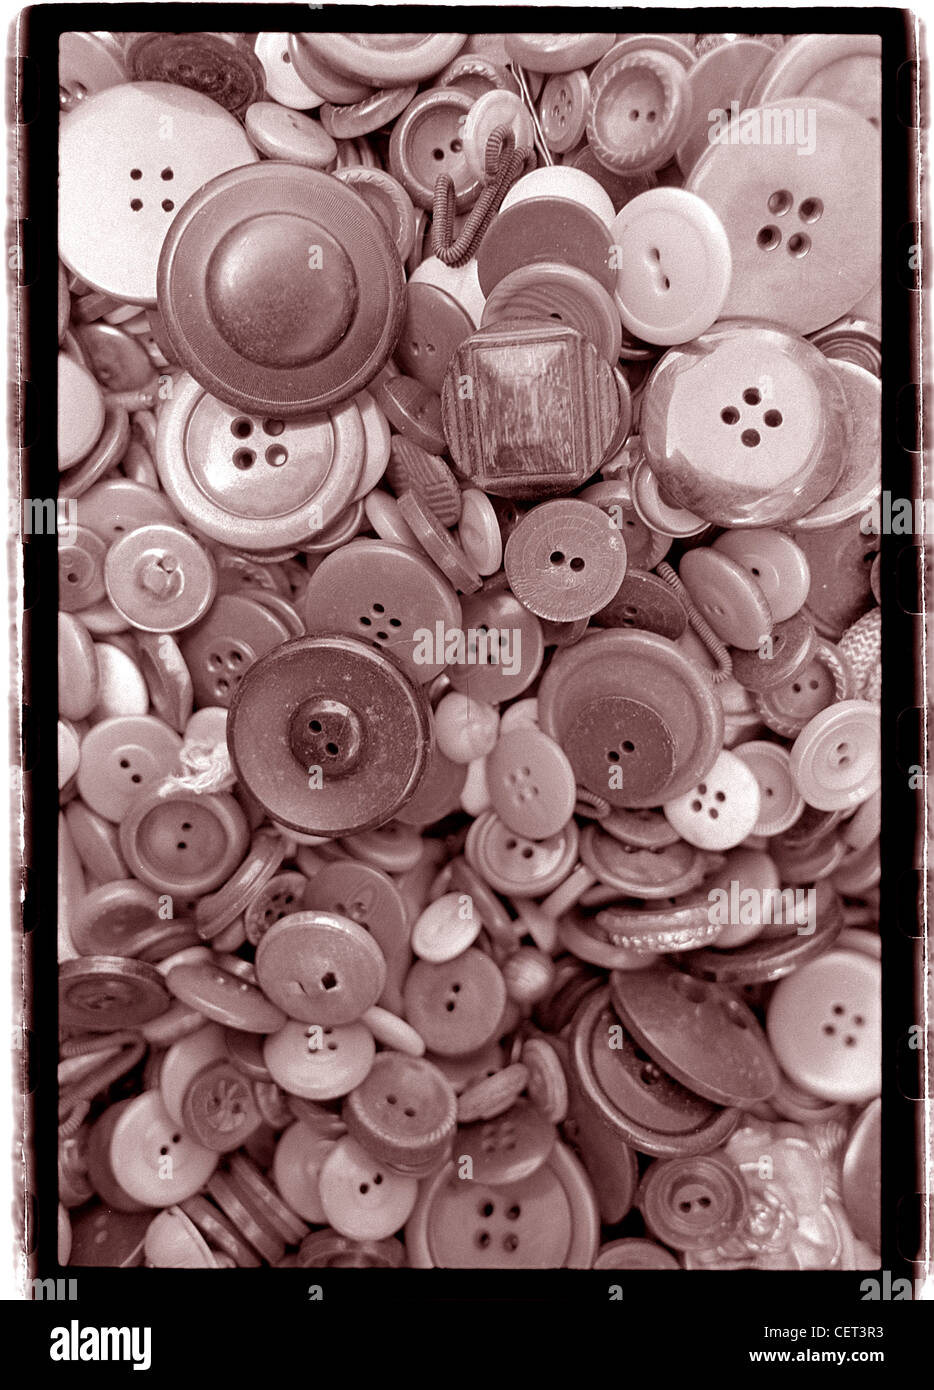 Cheap buttons piled together.  Vertical sepia toned photograph.  Street Fair, collectible junk graphic image patterns busy Stock Photo